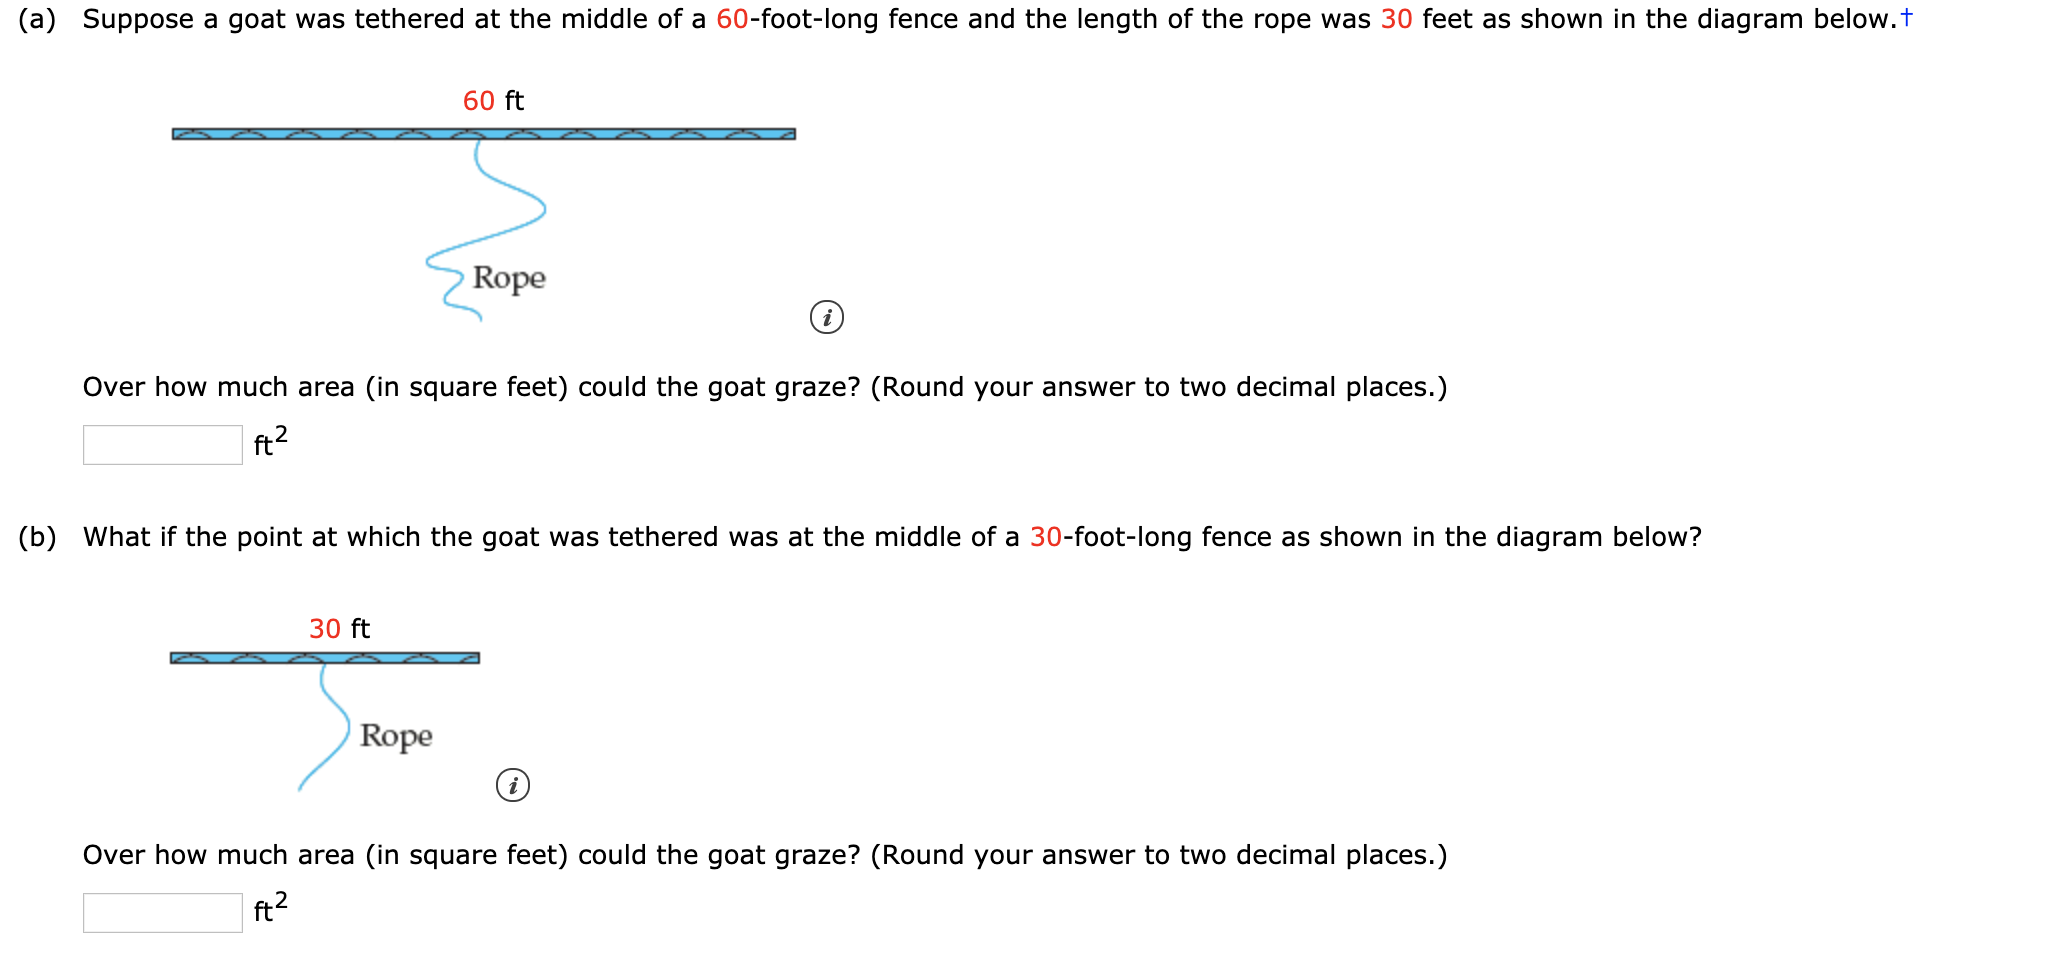 (a) Suppose a goat was tethered at the middle of a 60-foot-long fence and the length of the rope was 30 feet as shown in the diagram below.t
60 ft
Rope
Over how much area (in square feet) could the goat graze? (Round your answer to two decimal places.)
(b) What if the point at which the goat was tethered was at the middle of a 30-foot-long fence as shown in the diagram below?
30 ft
Rope
Over how much area (in square feet) could the goat graze? (Round your answer to two decimal places.)
ft2
